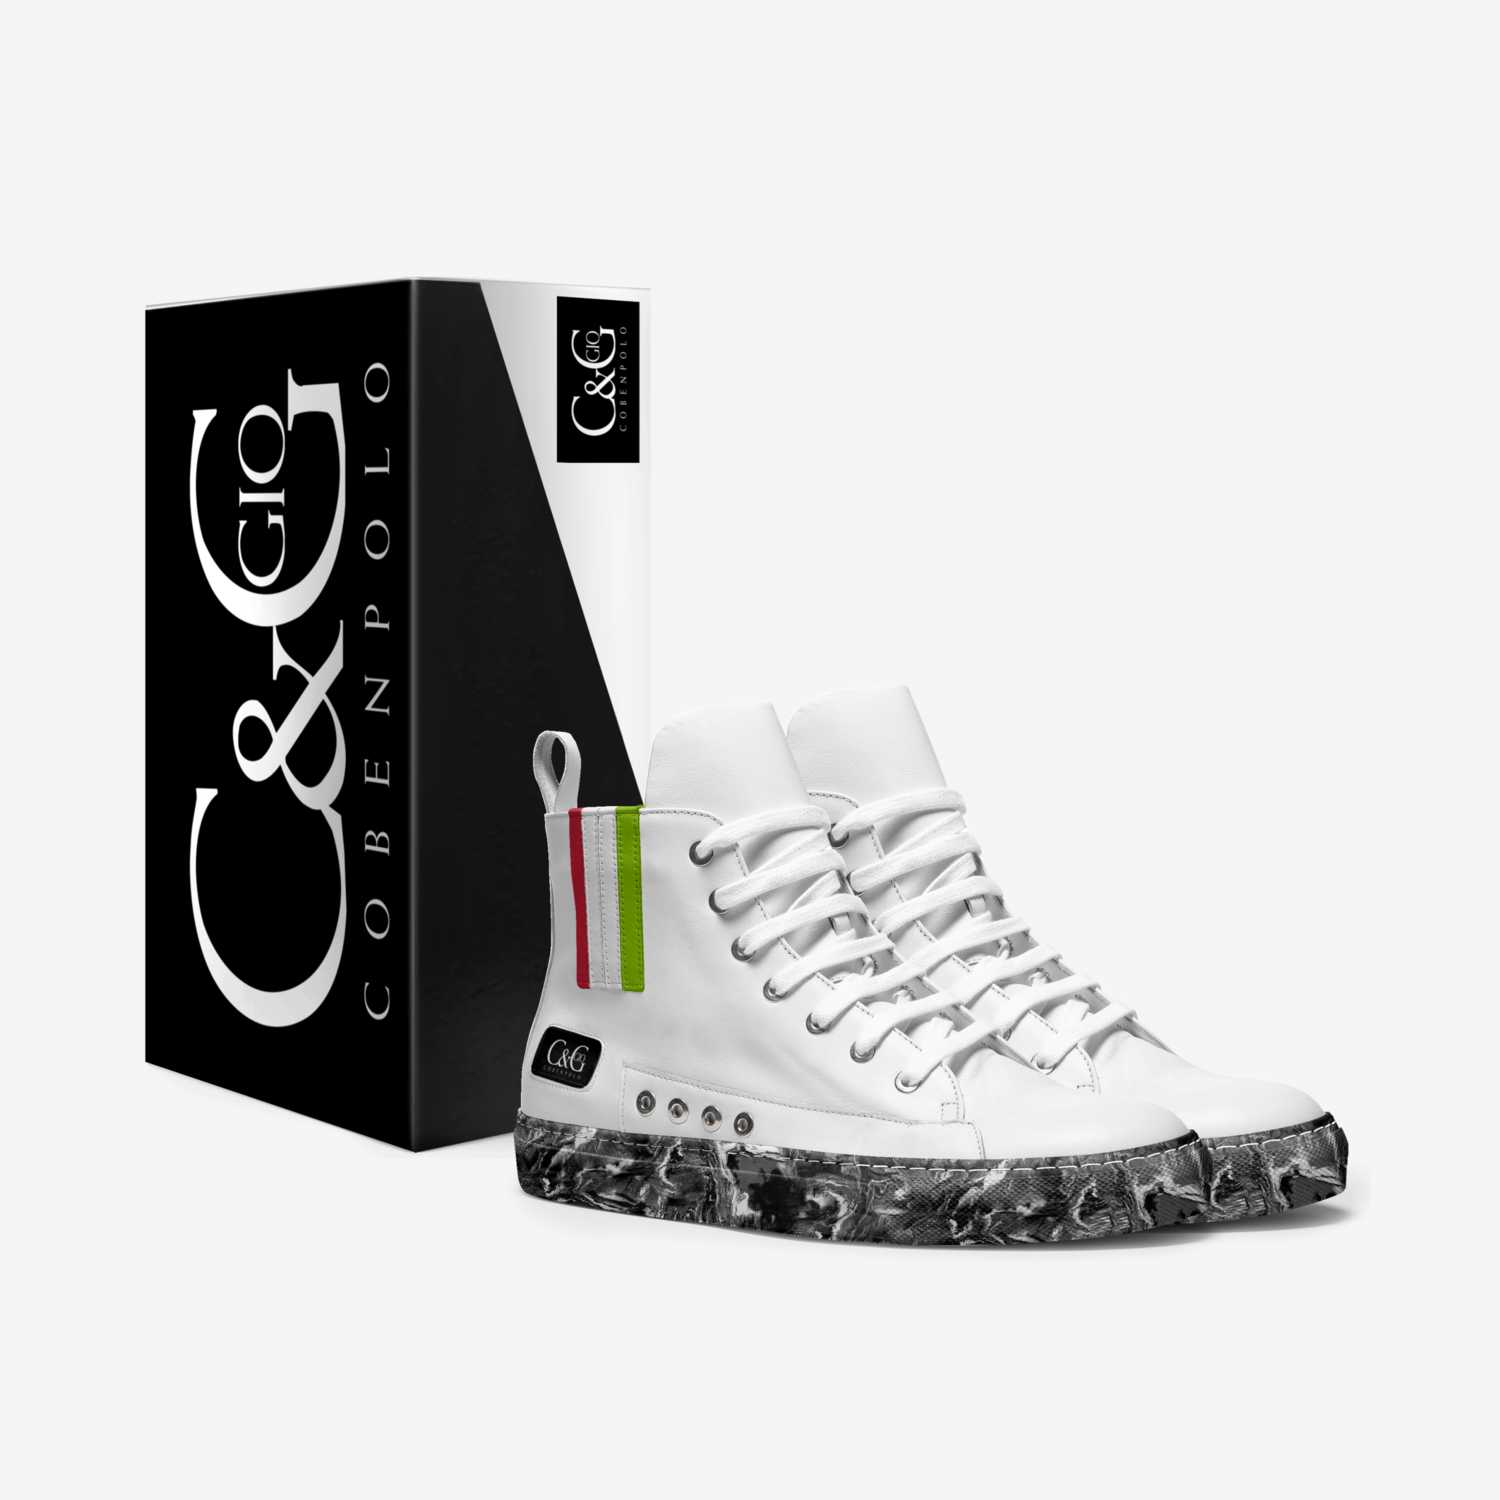 C&G custom made in Italy shoes by Coben&gio Cobenpolo | Box view